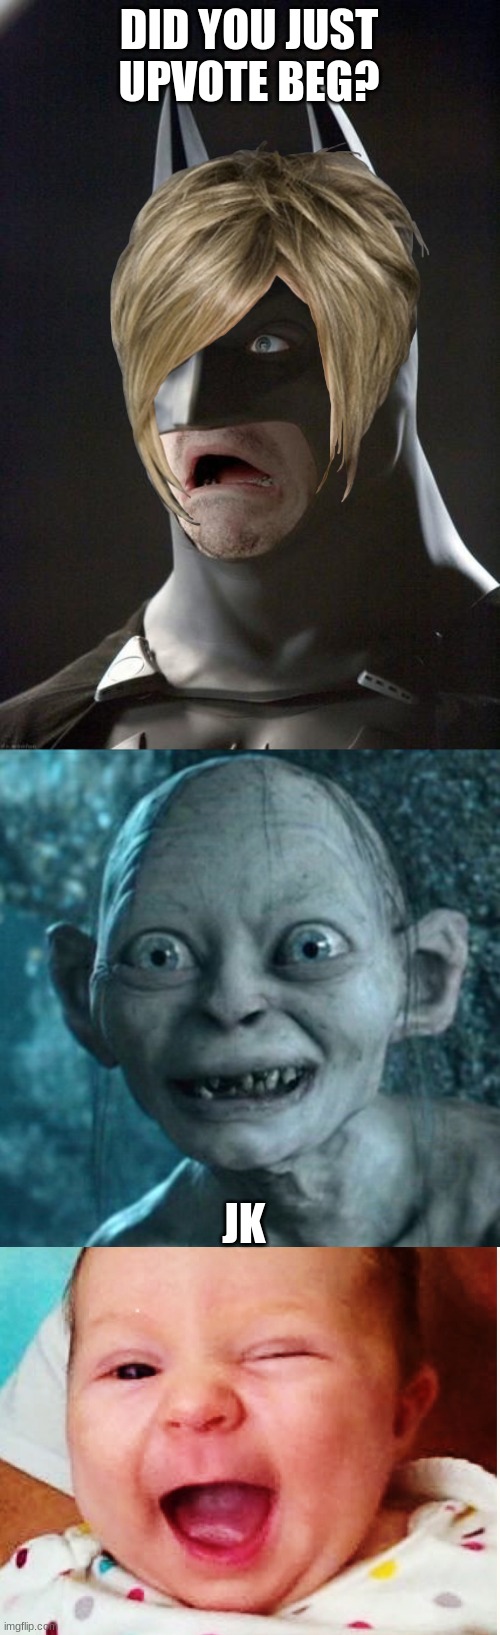 DID YOU JUST UPVOTE BEG? JK | image tagged in batman gasp,memes,gollum,wink | made w/ Imgflip meme maker